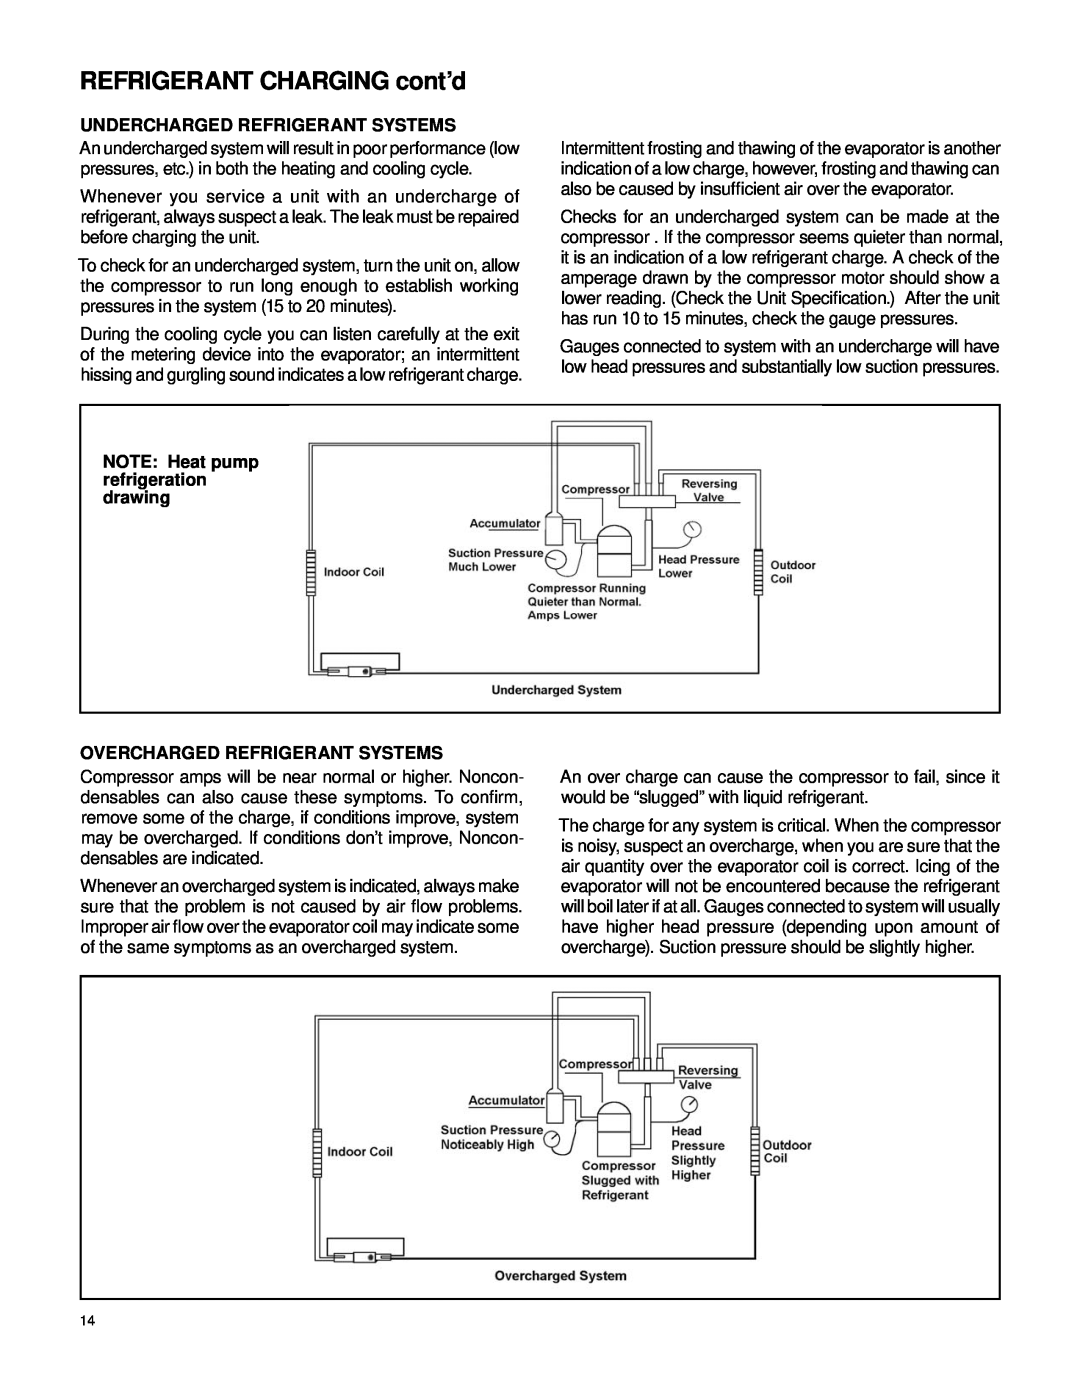 Friedrich 2007 REFRIGERANT CHARGING cont’d, Undercharged Refrigerant Systems, NOTE Heat pump refrigeration drawing 